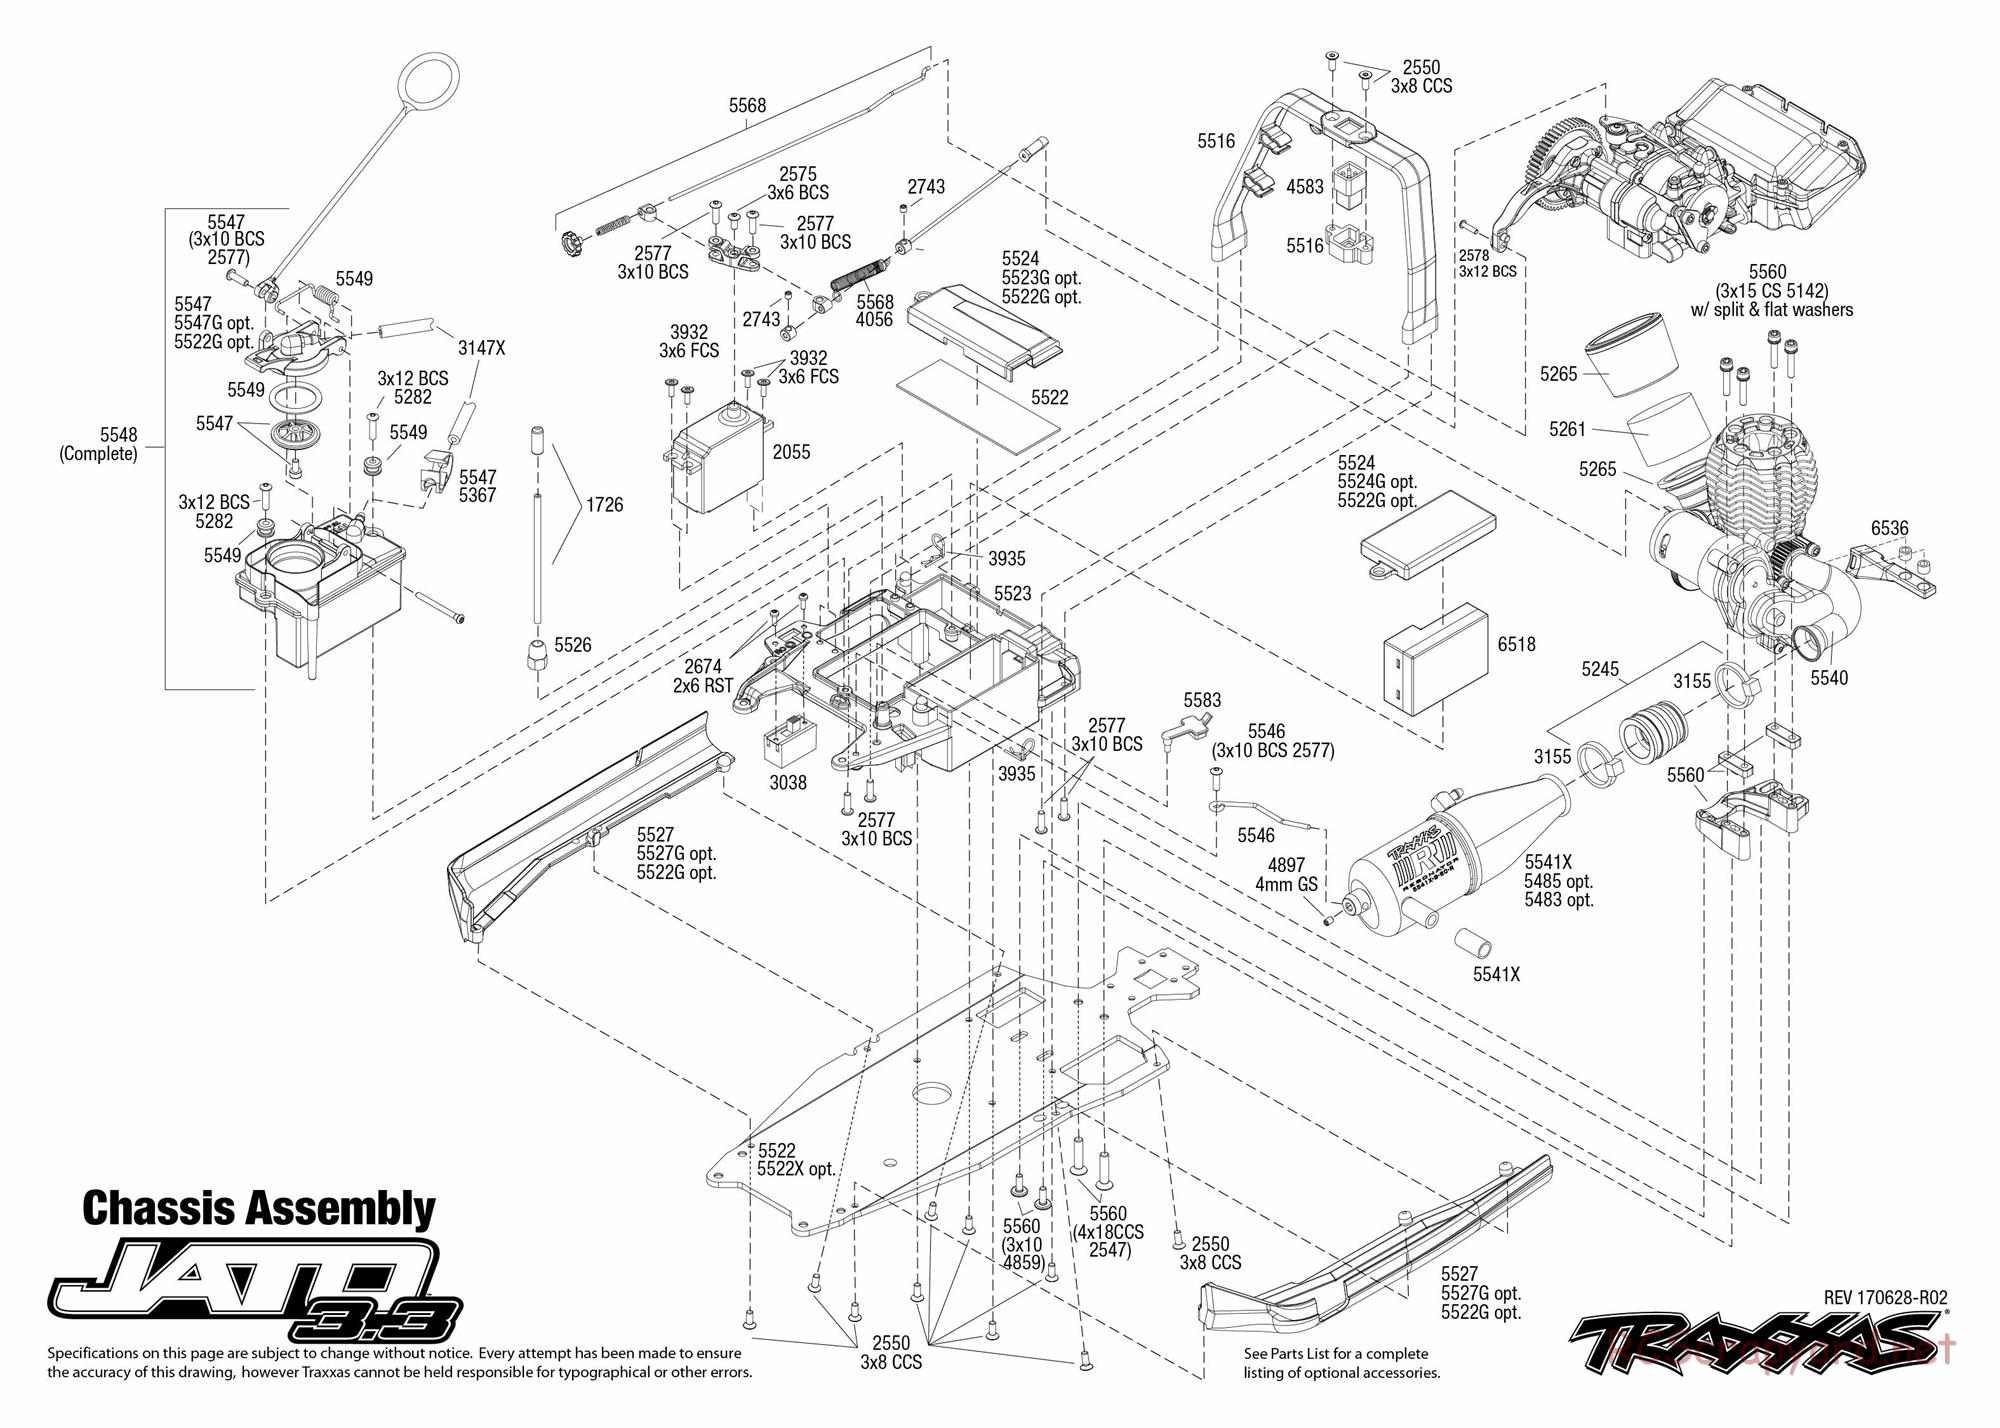 Traxxas - Jato 3.3 (2014) - Exploded Views - Page 1